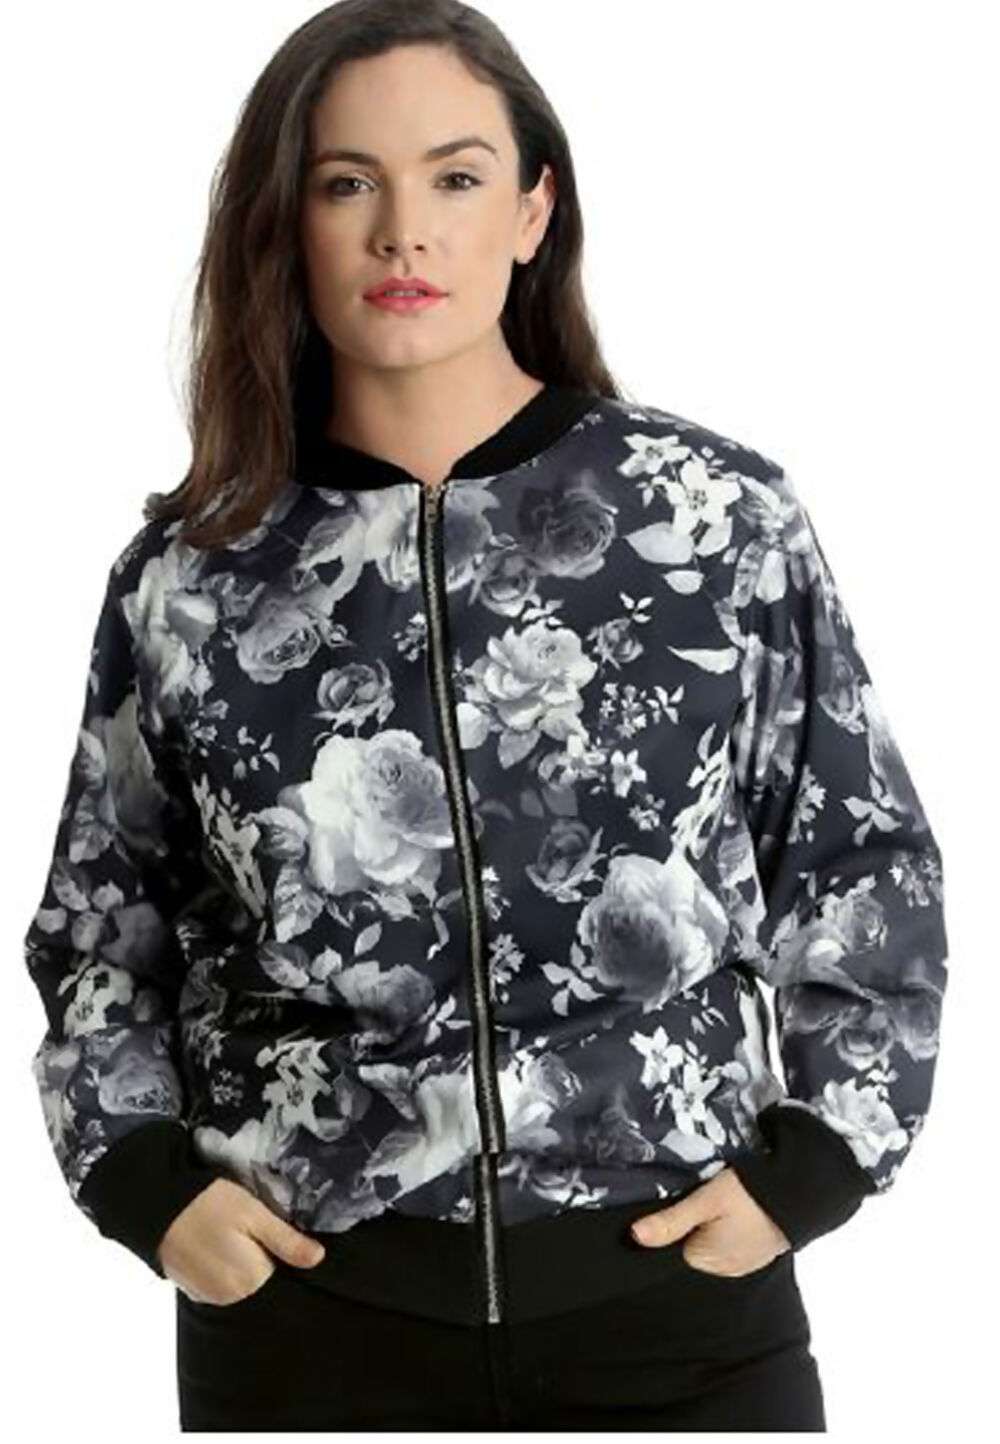 PLUS SIZE FLORAL BOMBER JACKET - Stylish and Comfortable Jackets for Women